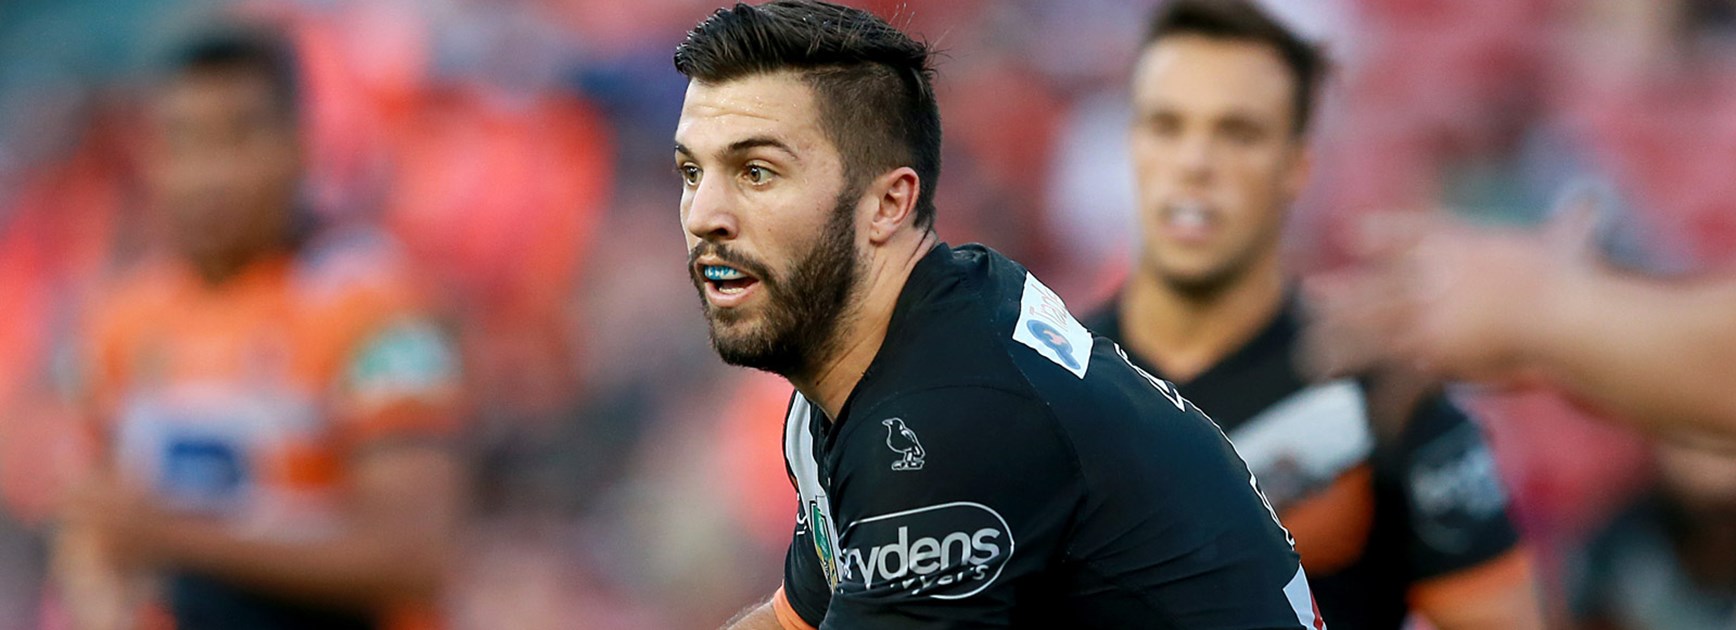 Wests Tigers fullback James Tedesco could play for one of two rep teams in Rep Round.